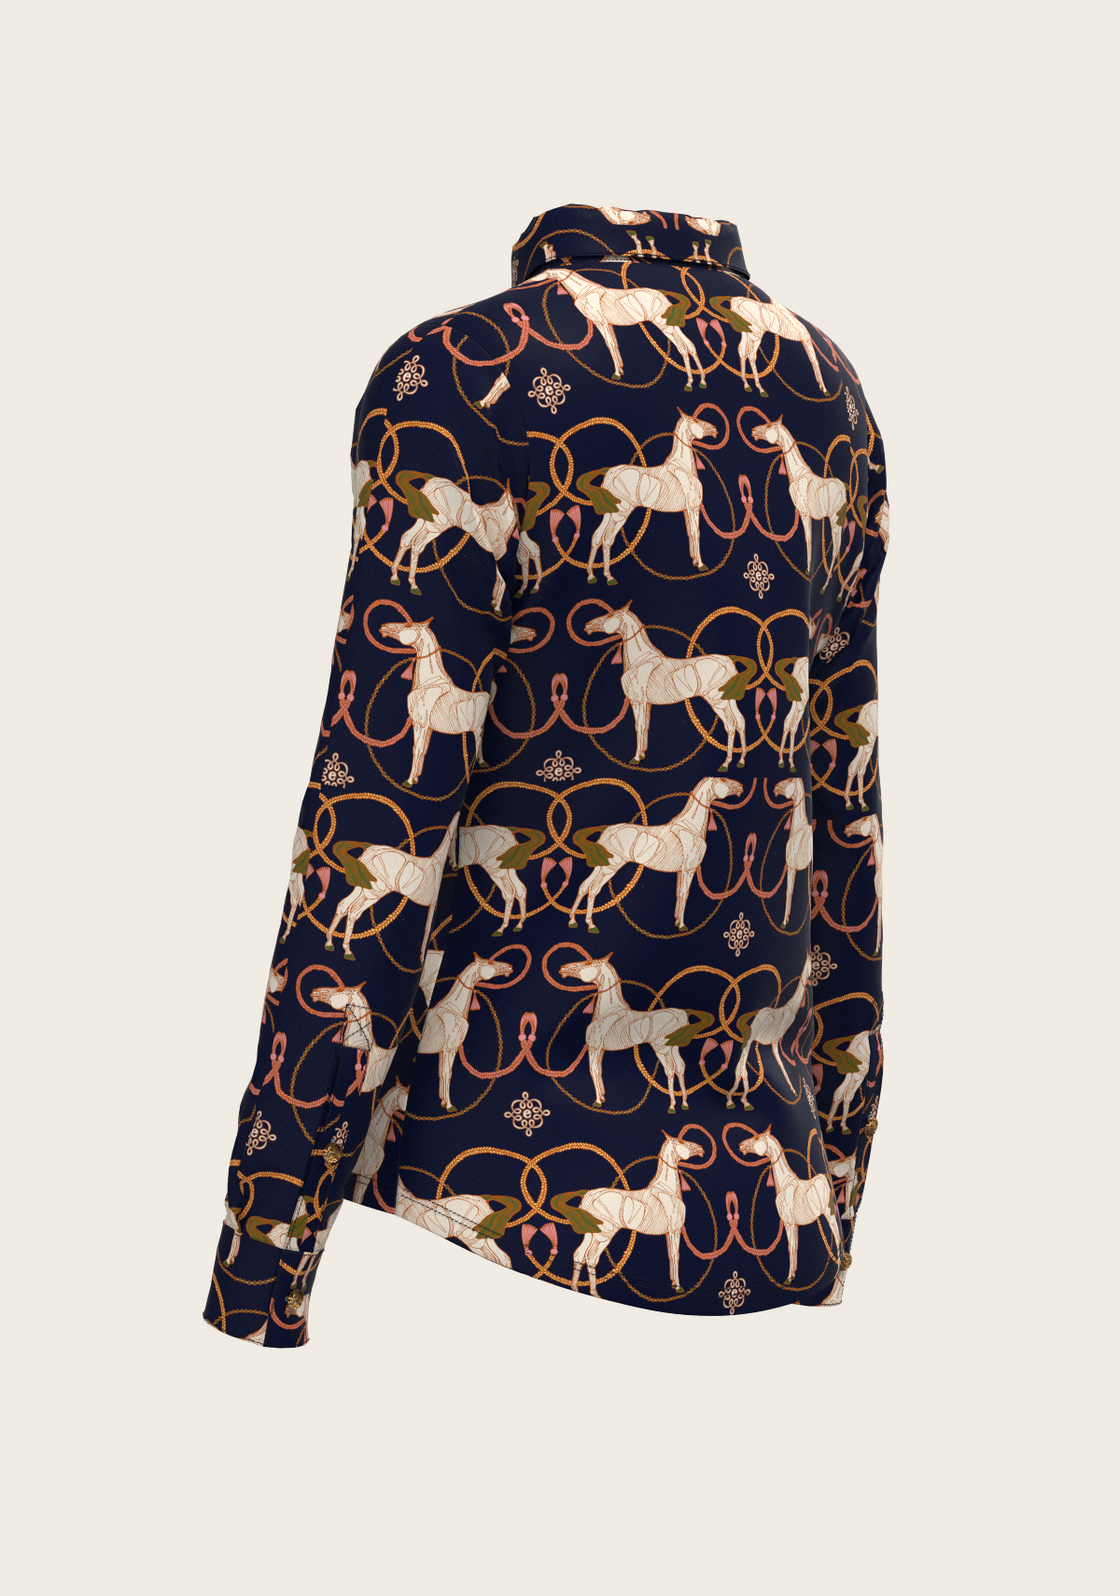 Roped Horses on Navy Ladies Button Shirt